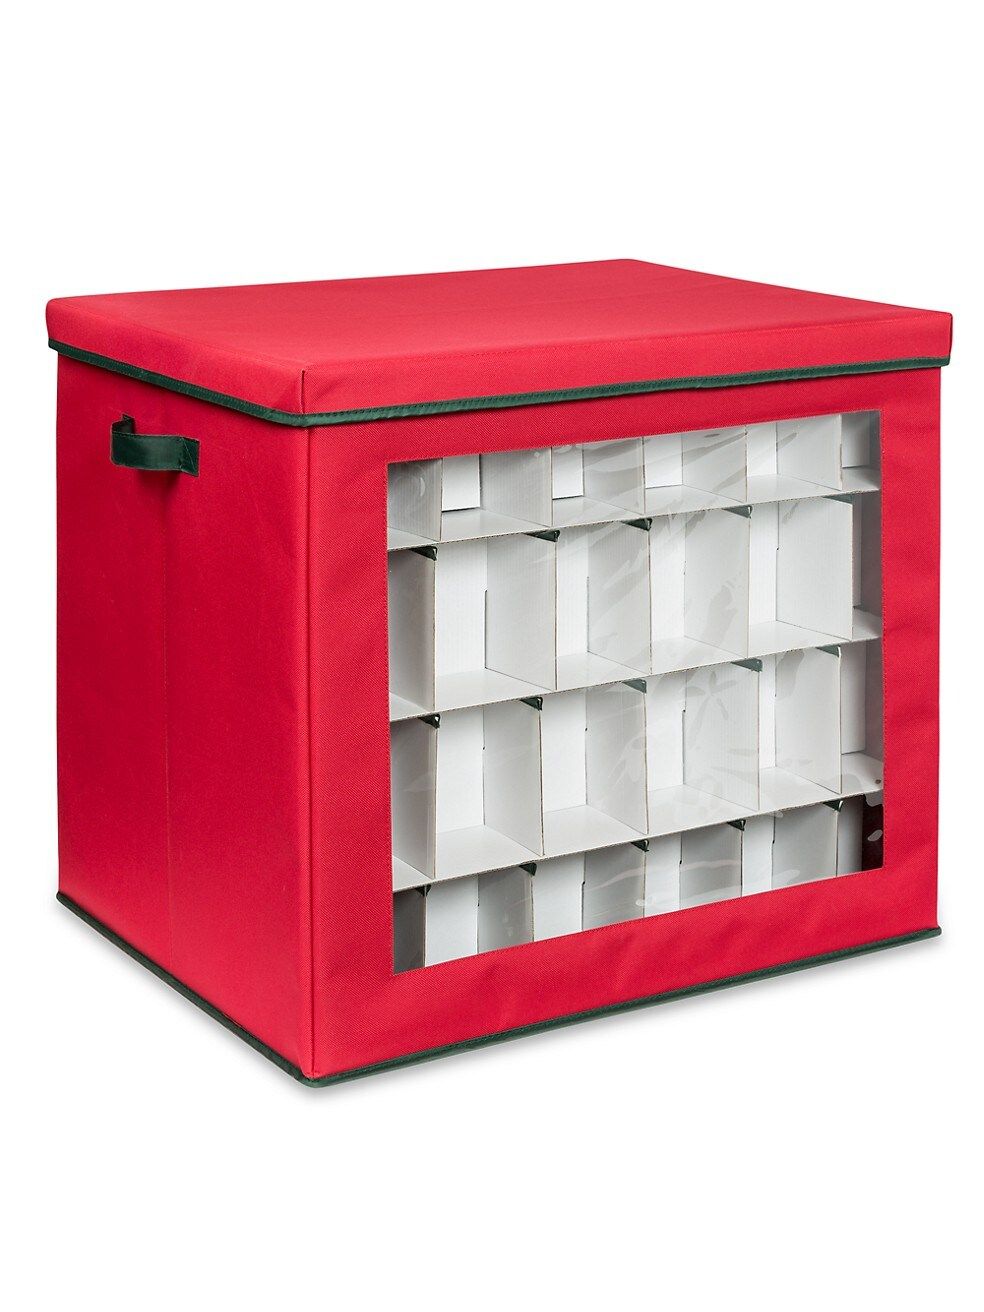 120-Cube Ornament Storage Container | Saks Fifth Avenue